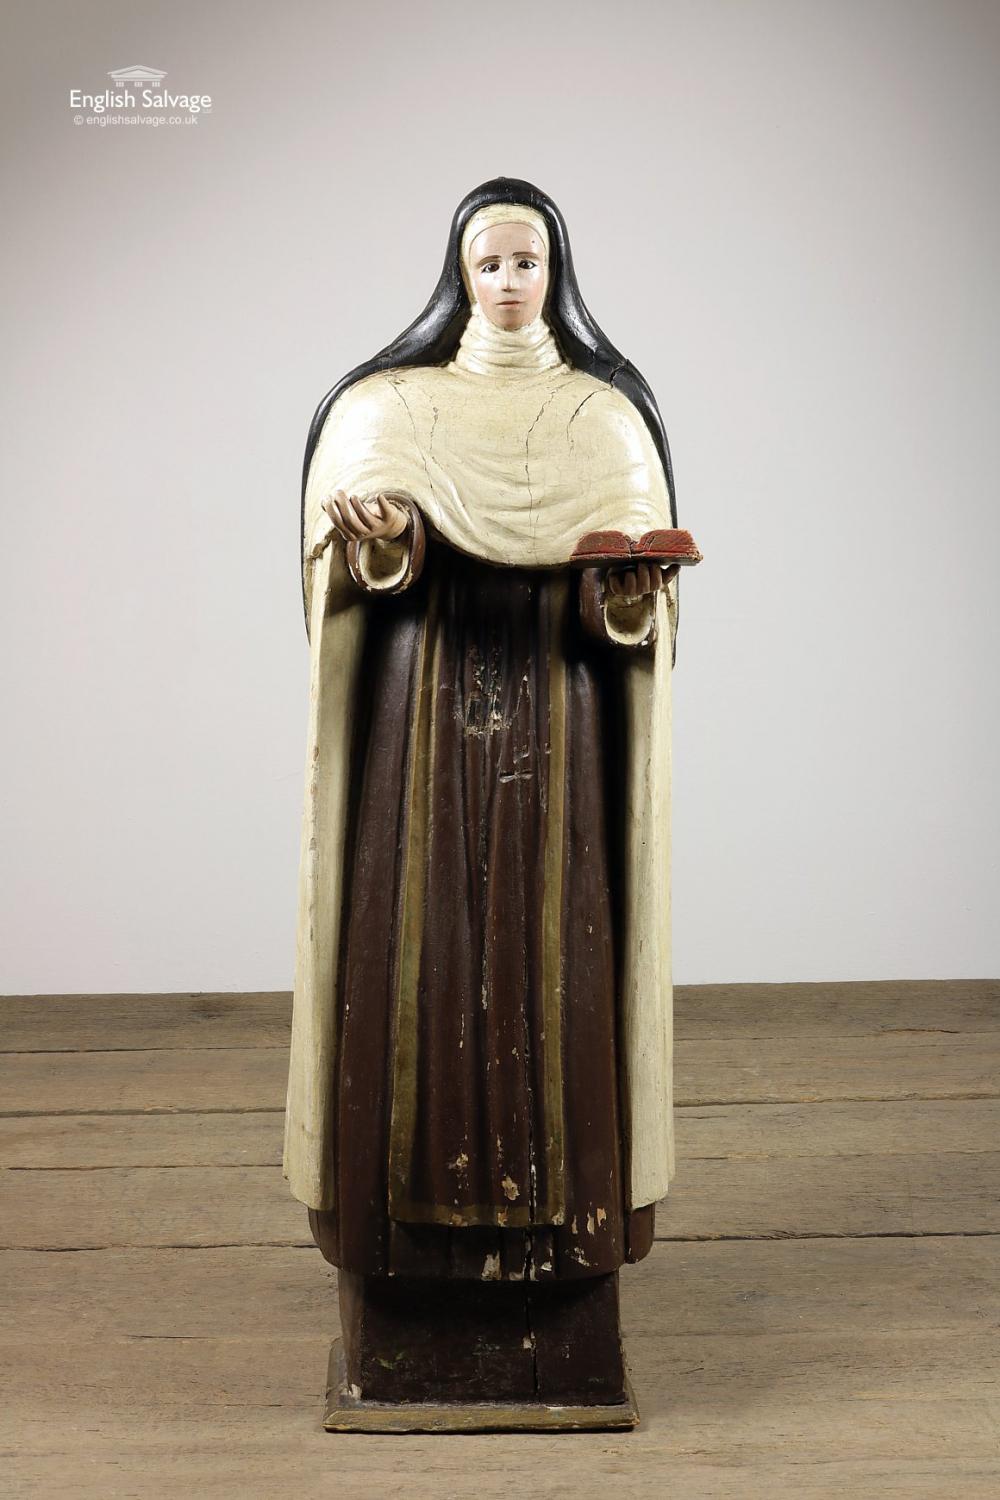 Reclaimed late 18th century wooden statue, reputedly from Spain. Hand carved and painted, depicting either a female saint or a nun, with inset glass eyes, with outstretched arms, holding a book.

Splits, small chips and dings.